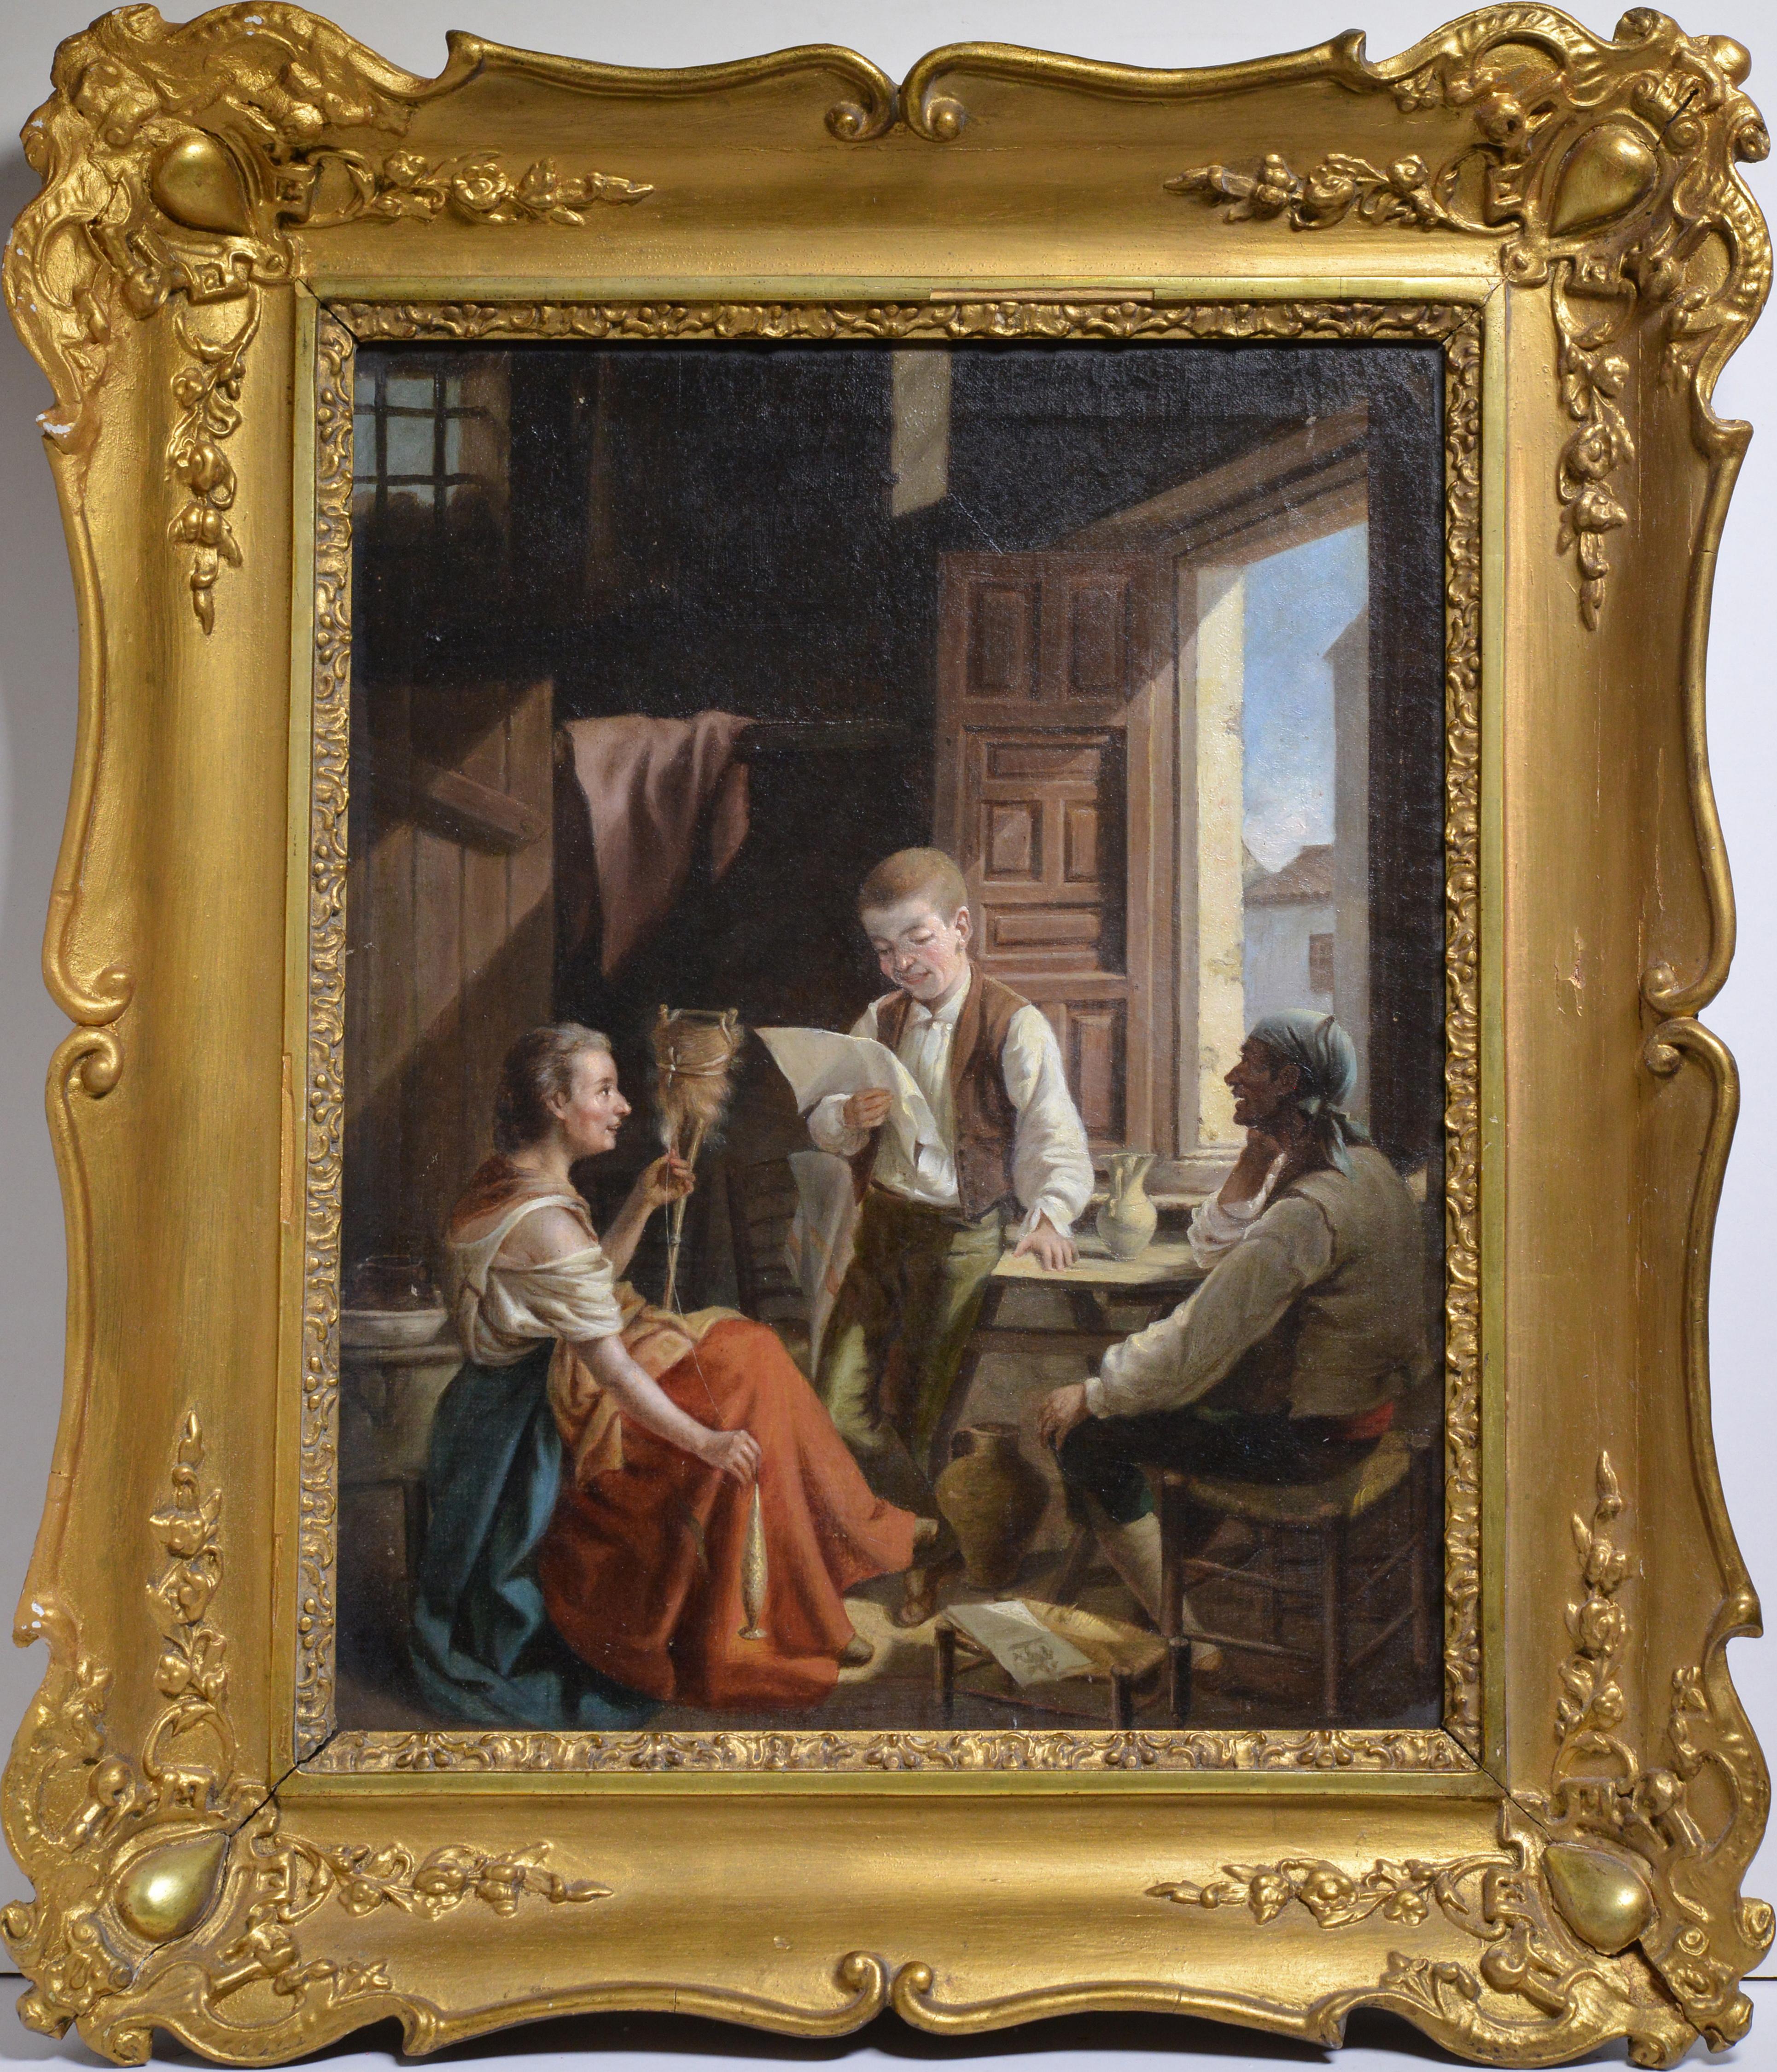 Unknown Interior Painting - Interior genre scene Reading Early 20th century Oil painting Well framed 